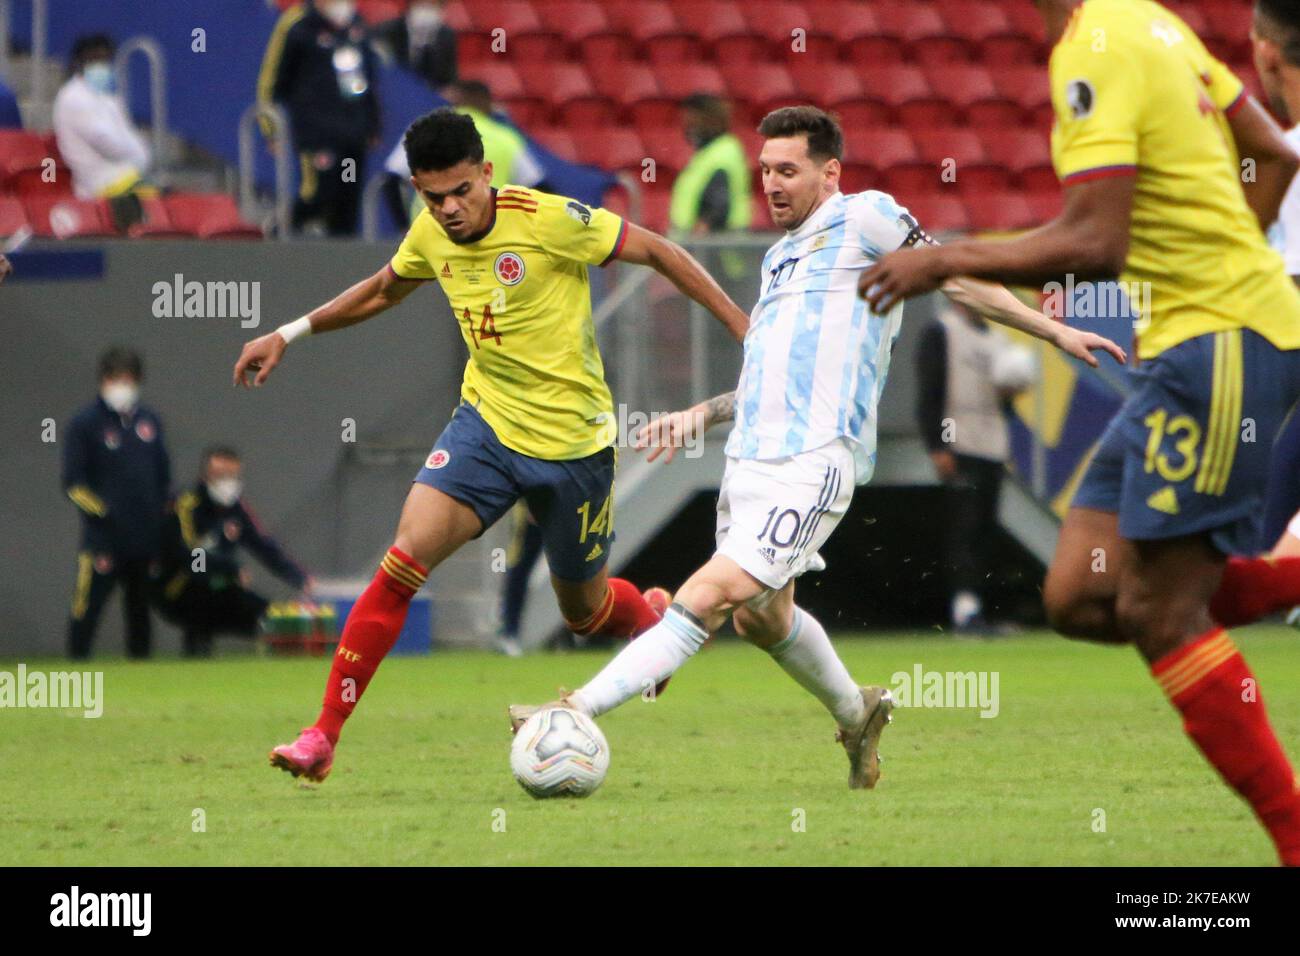 ©Laurent Lairys/MAXPPP - Lionel Messi of Argentina and L Diaz of Colombia during the Copa America 2021, semi-final football match between Argentina and Colombia on July 6, 2021 at Estádio Nacional Mané Garrincha in Brasilia, Brazil photos Laurent Lairys /MAXPPP Stock Photo